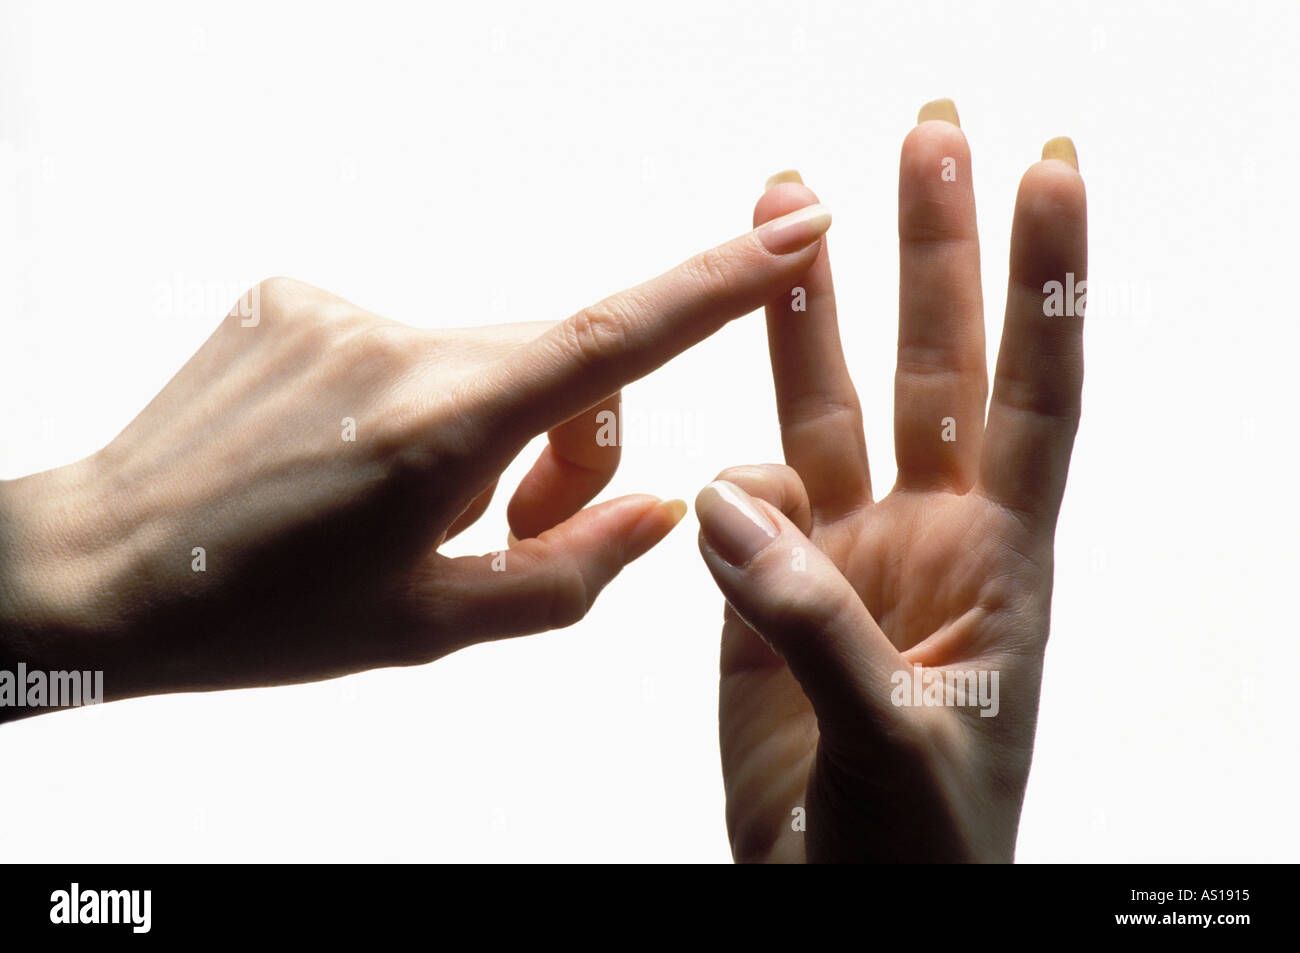 Woman's hands counting  to 3 on her  fingers silhouetted on white background Stock Photo